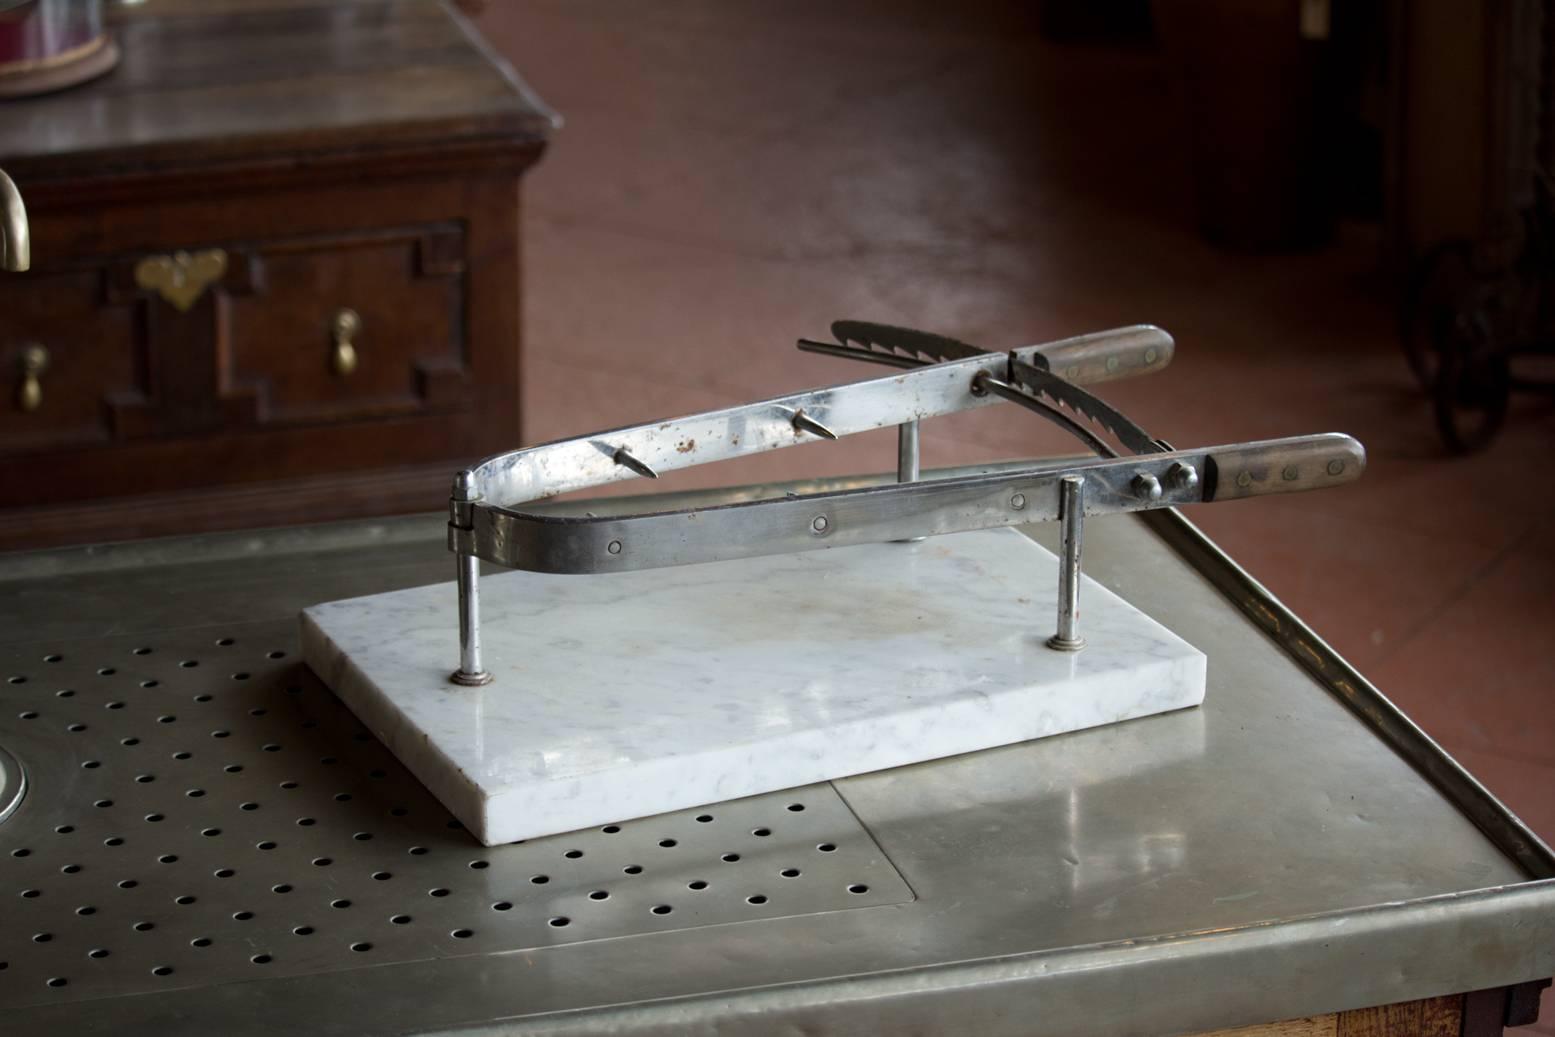 Lovely antique French jambon/ham holder on white Carrara marble base and wood handle grips. The steel mechanism with adjustable sharp spiked jaws holds the ham in place.